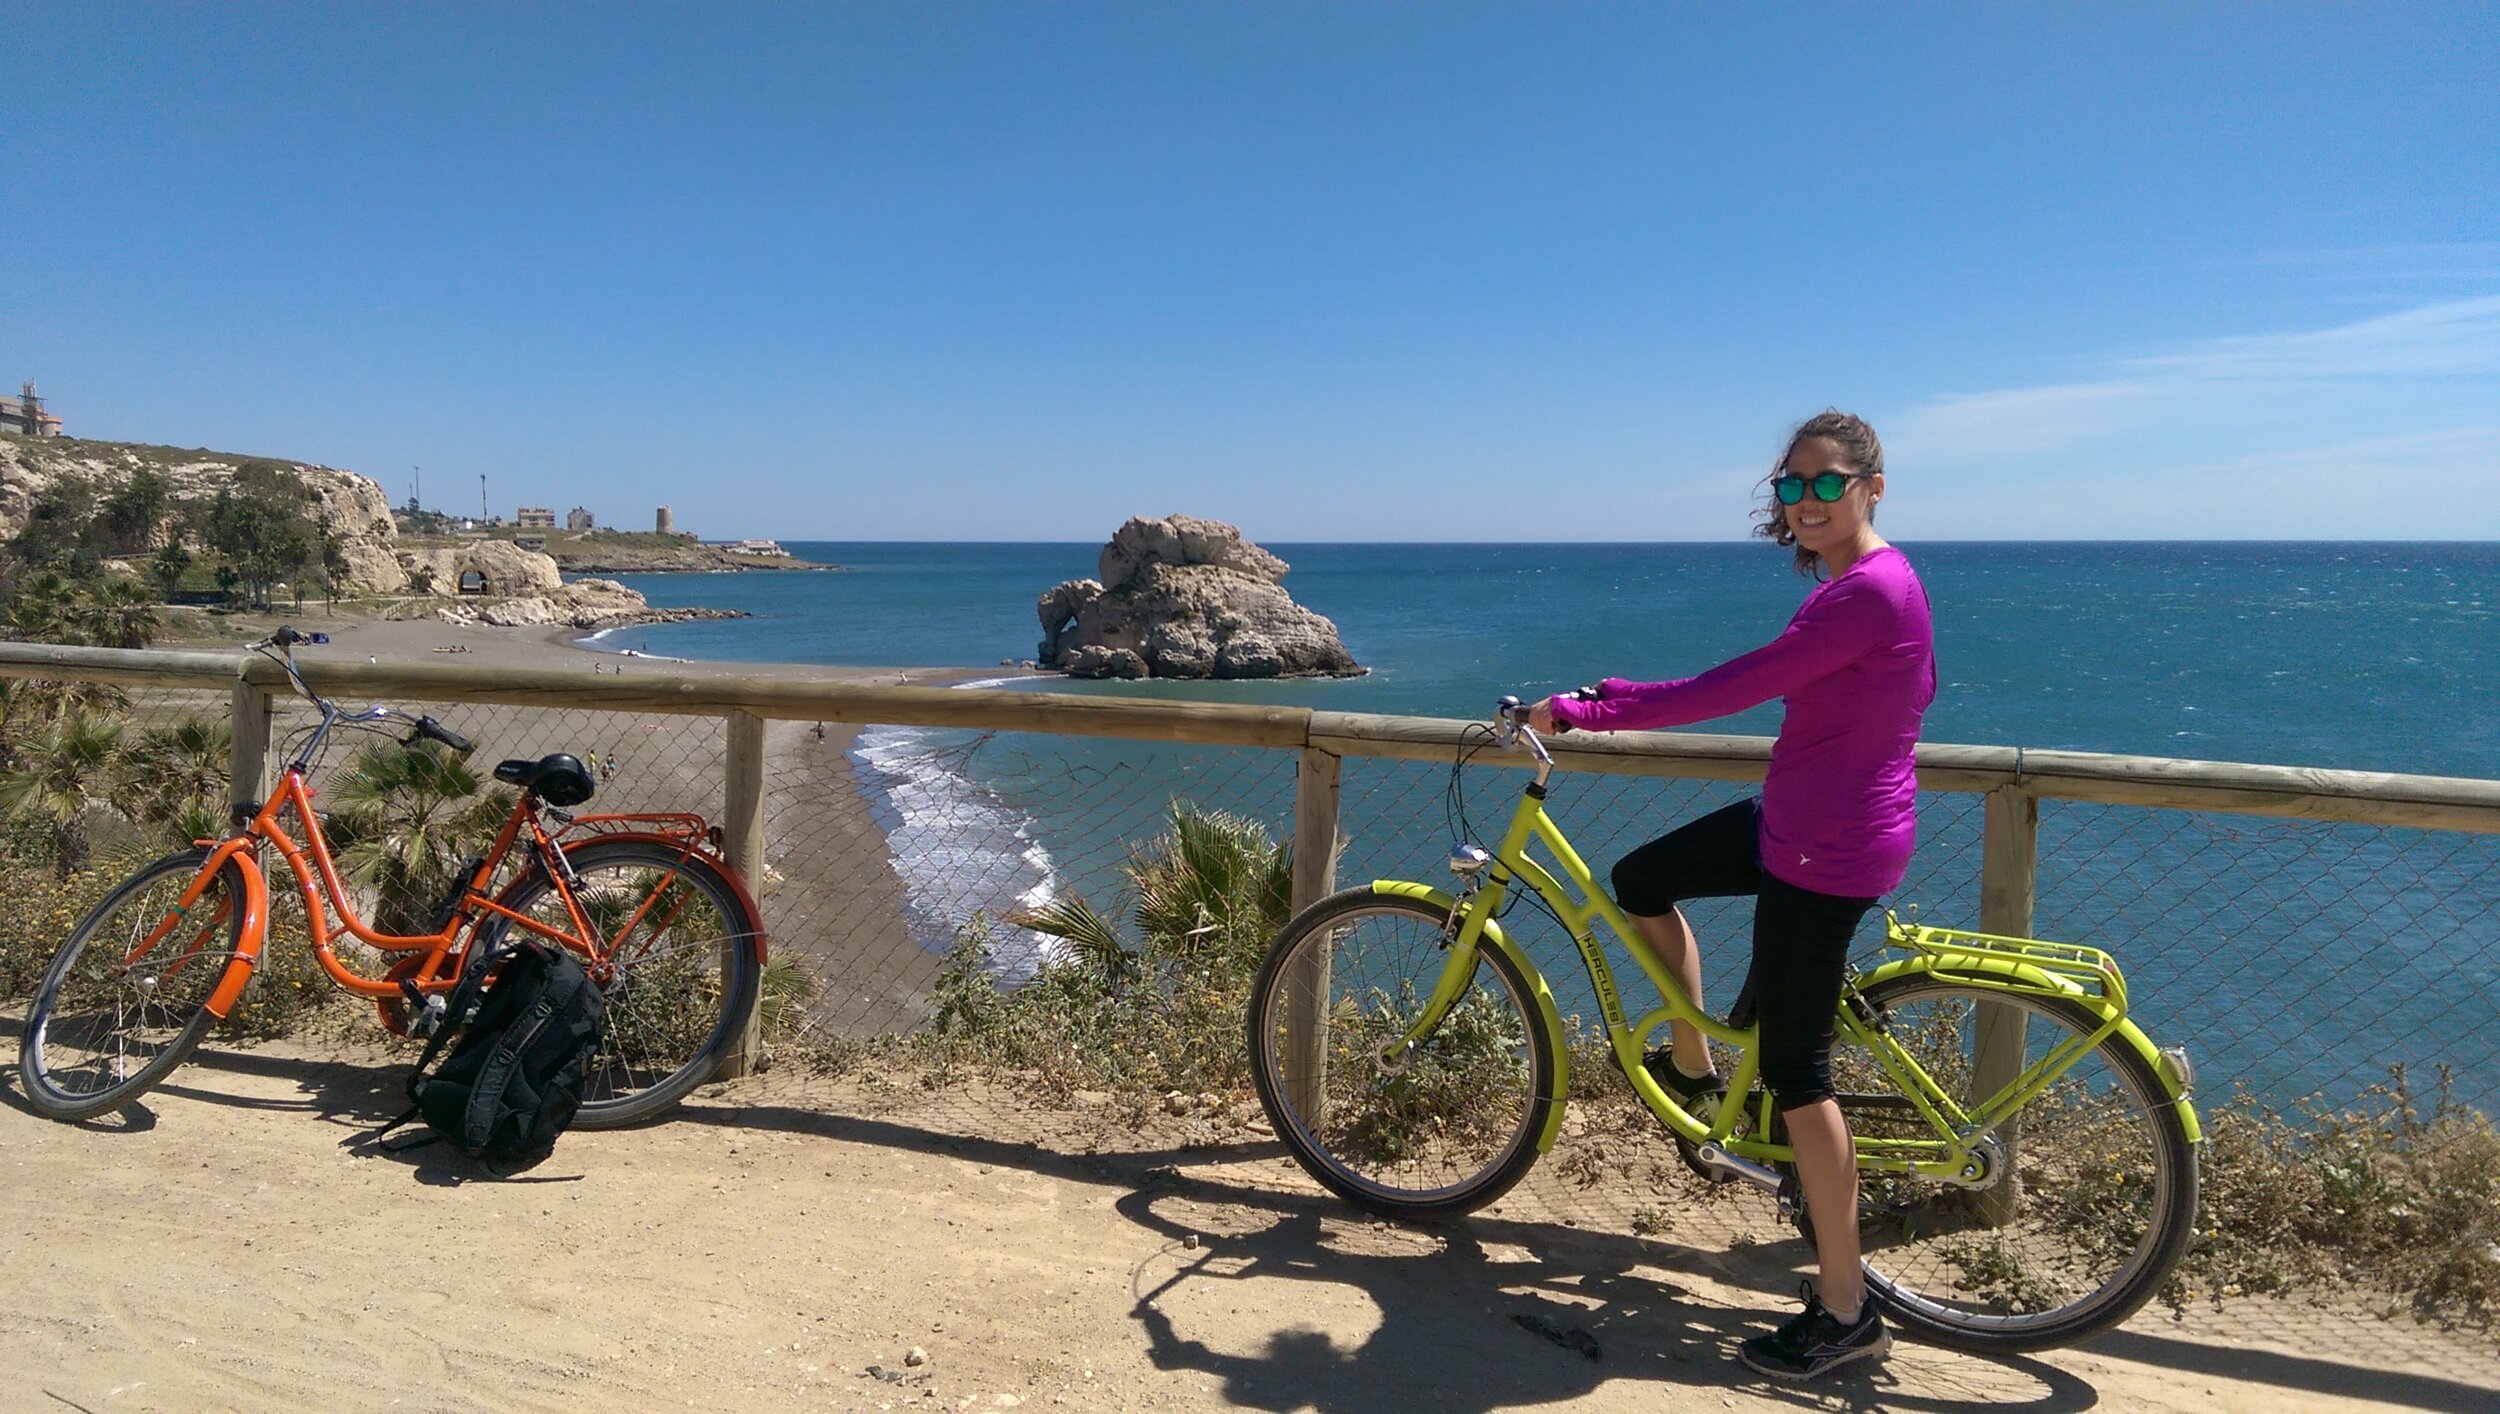 Biking by the sea is both a workout and a joy for me.